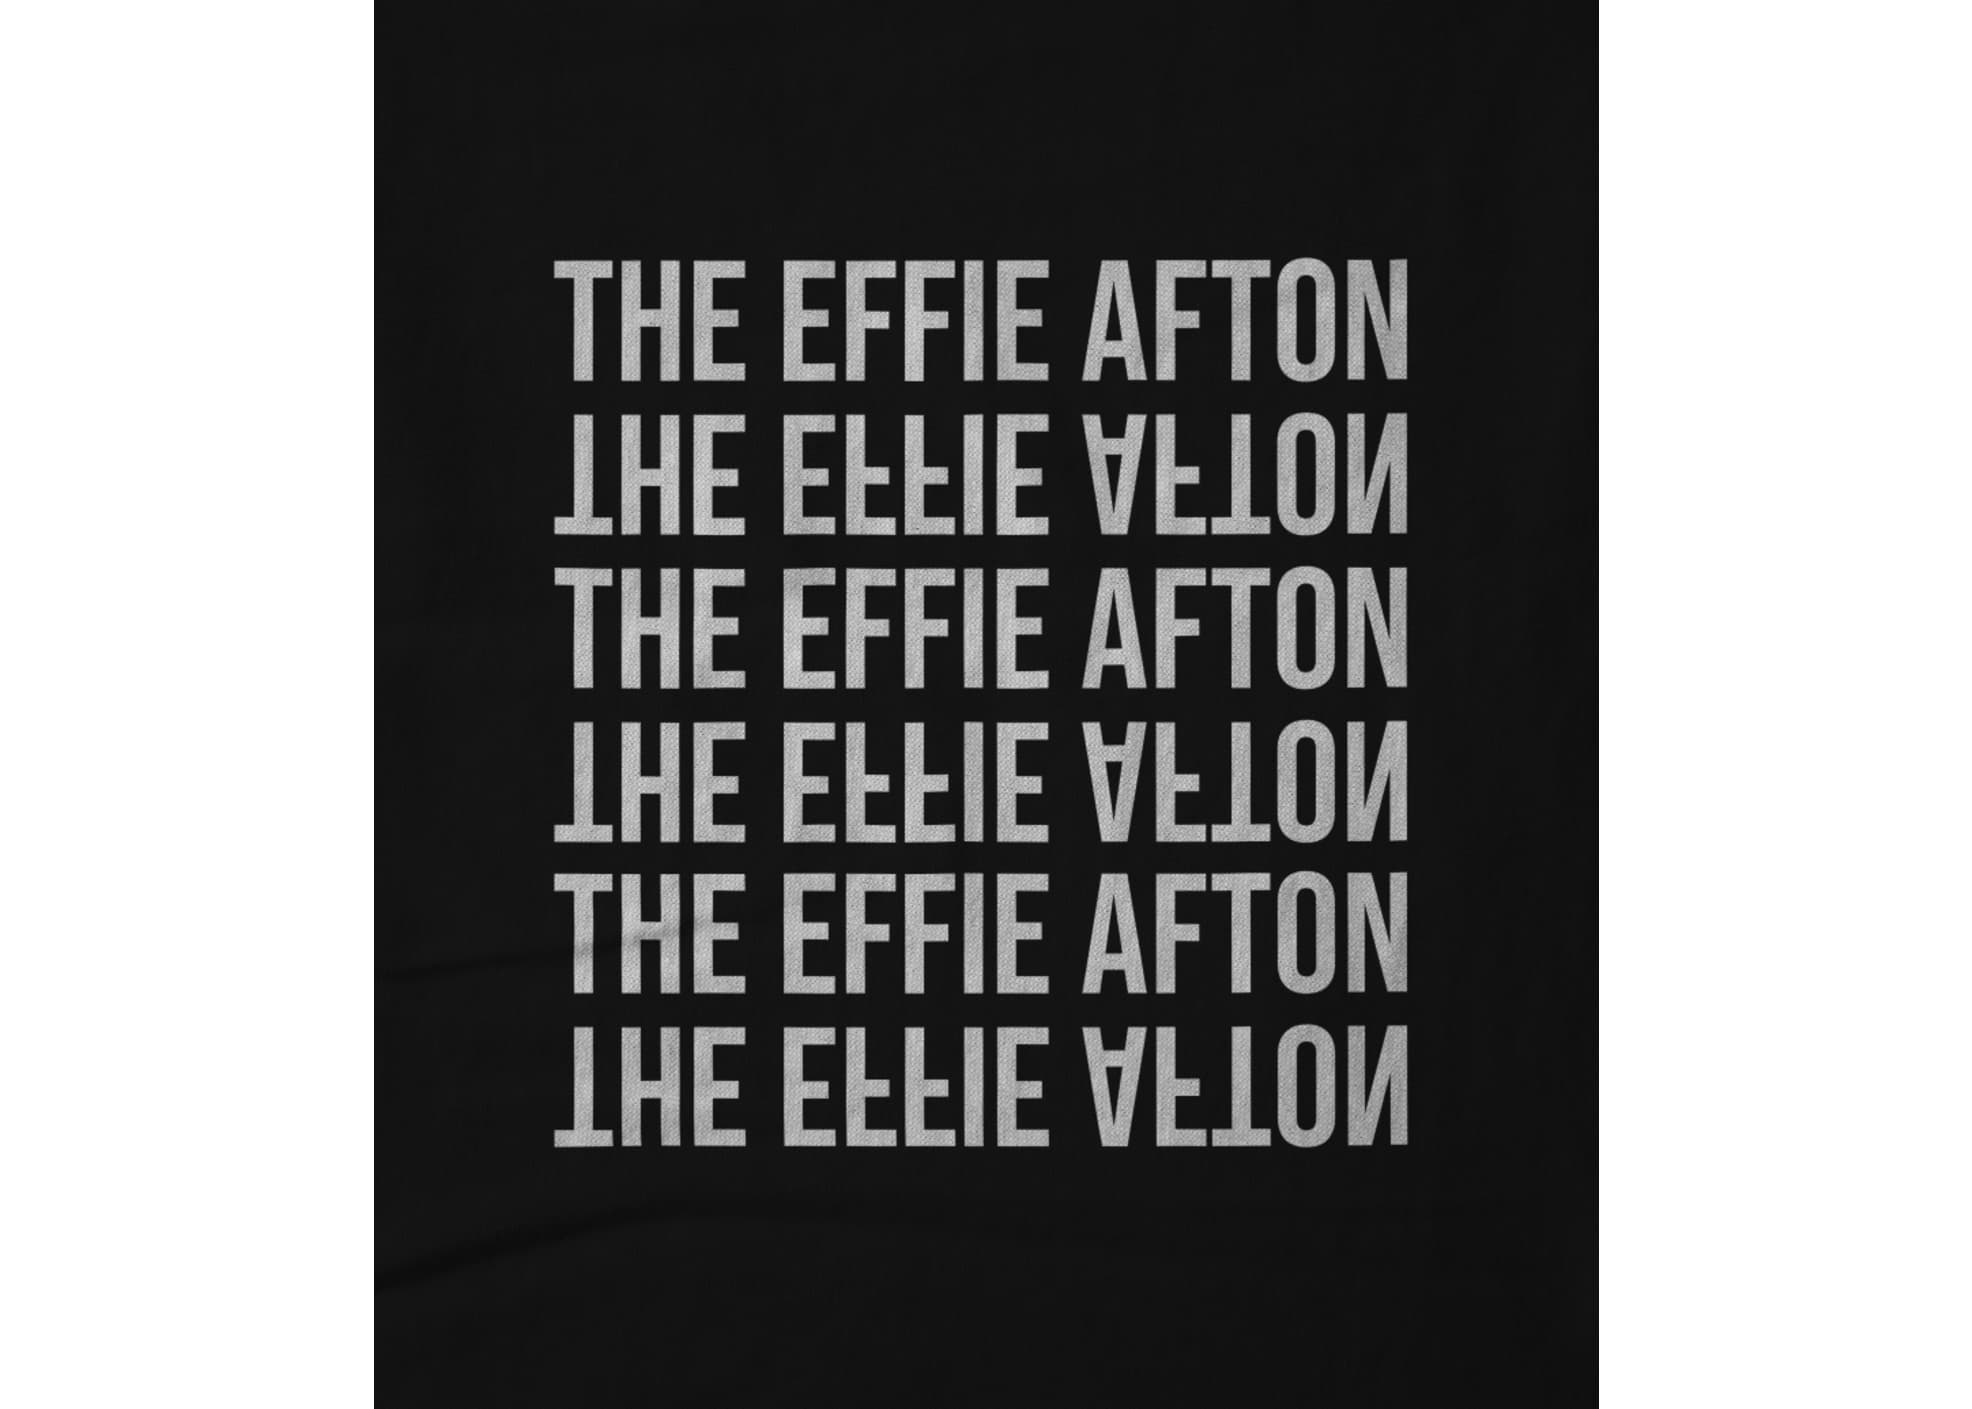 The effie afton inverted text 1583590656